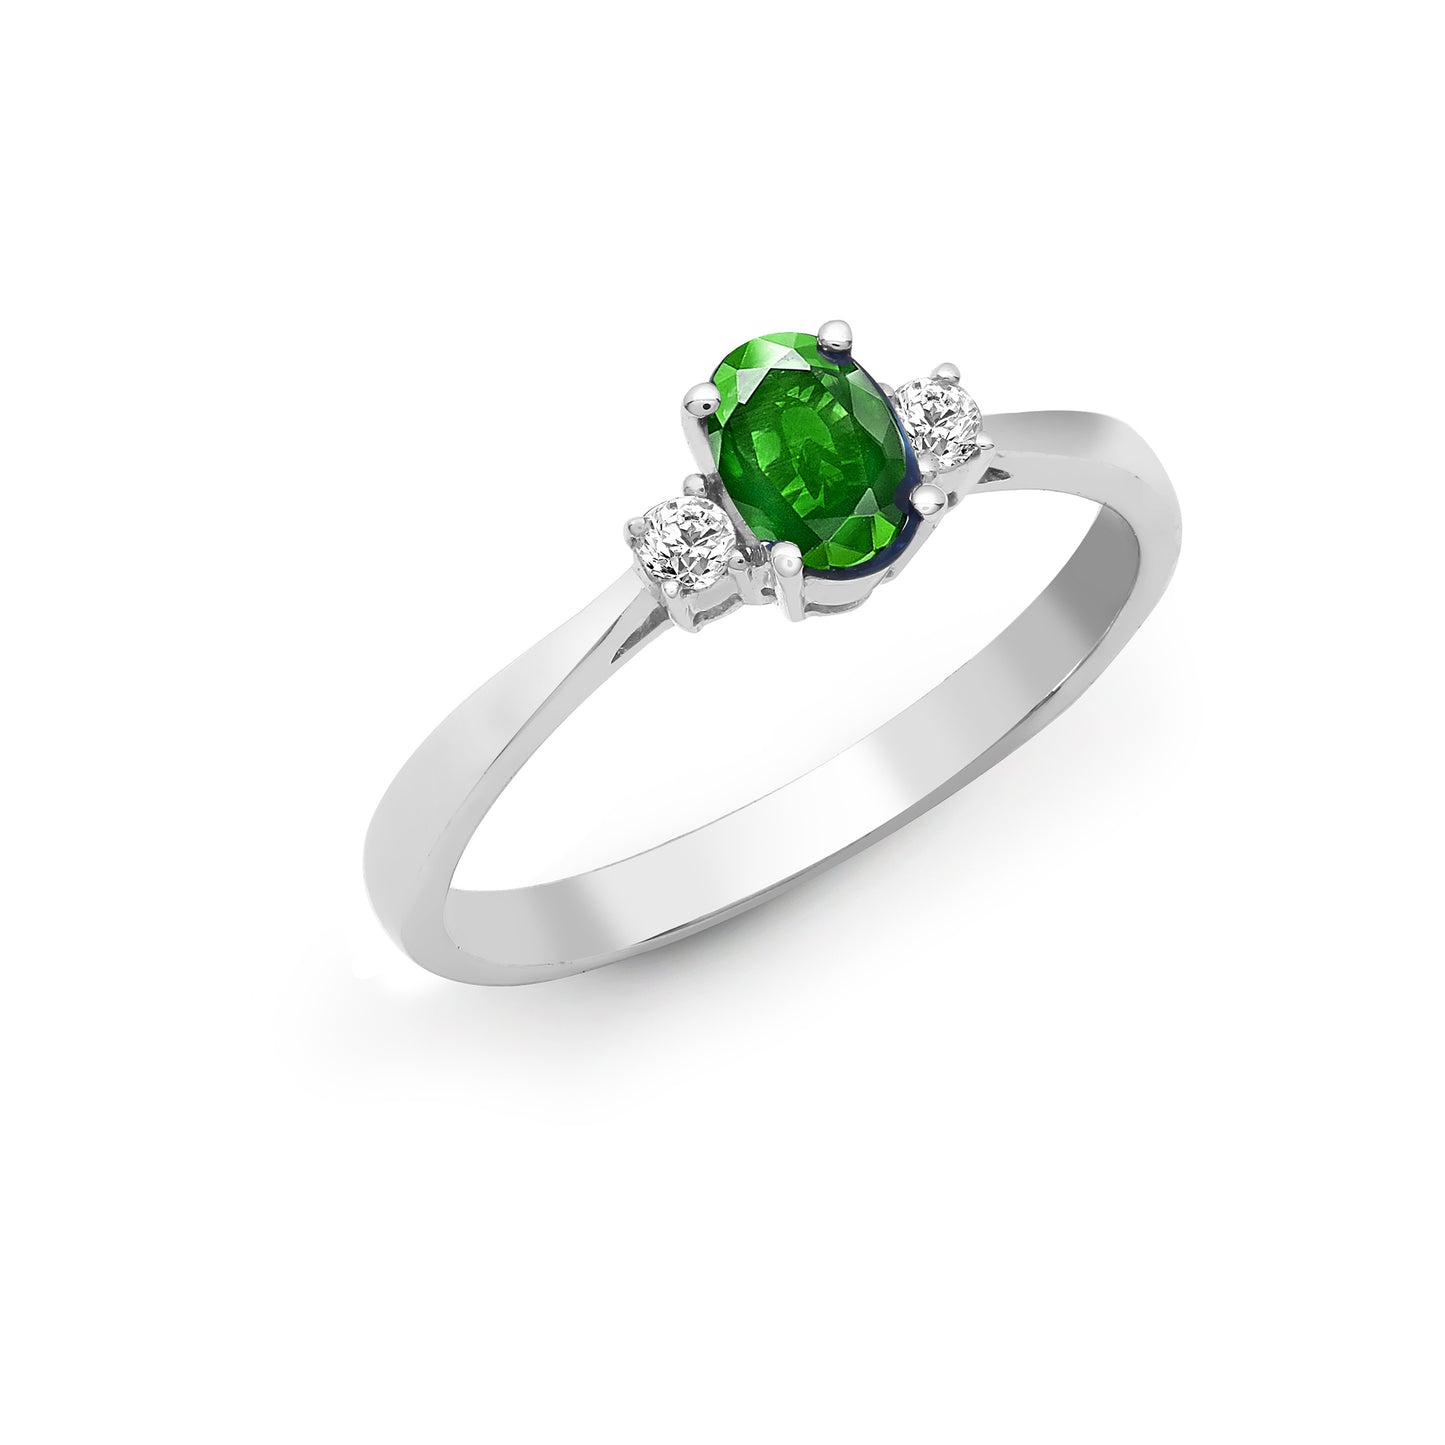 18ct White Gold  Diamond Green Emerald Trilogy Engagement Ring 6mm - 18R631